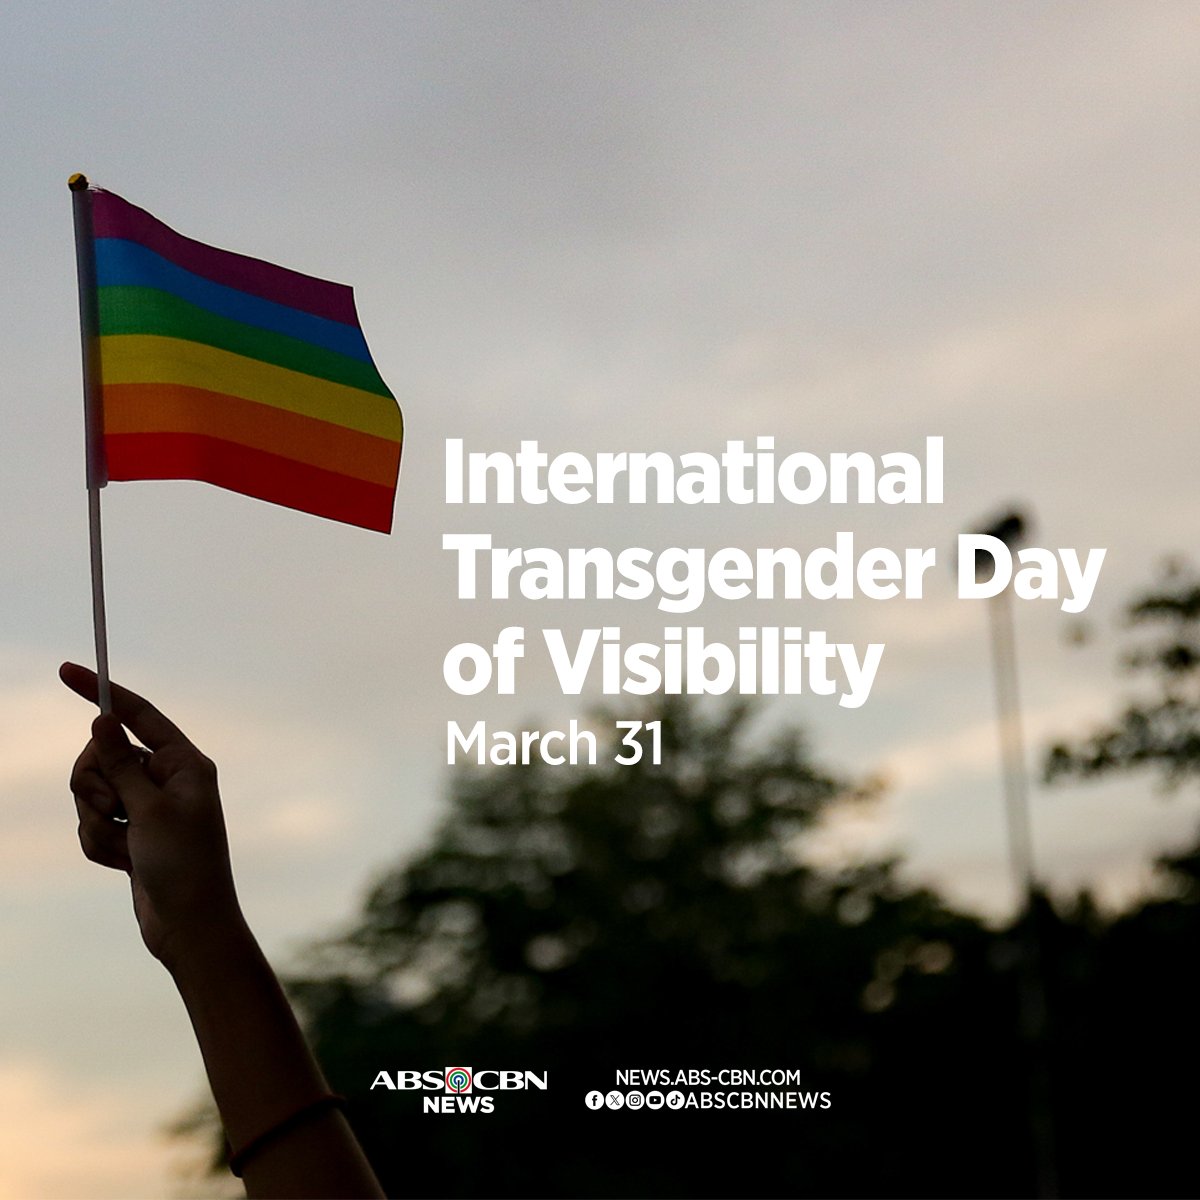 You are seen and you are loved. 🏳️‍🌈 Happy International Transgender Day of Visibility!